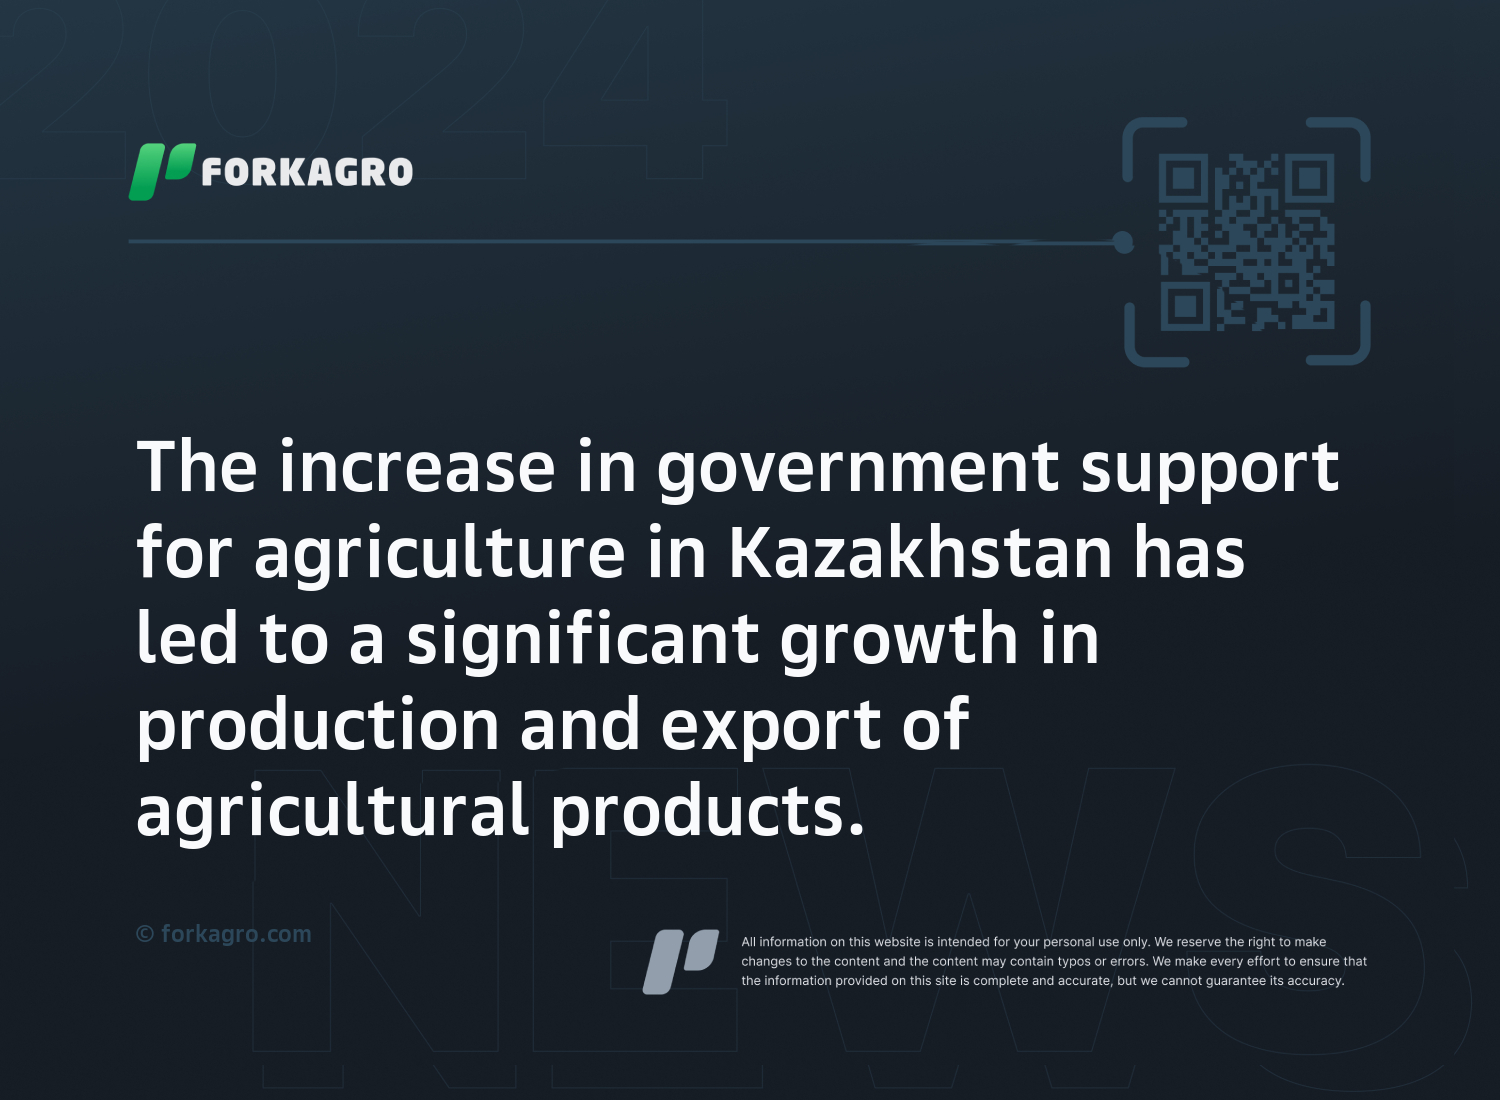 The increase in government support for agriculture in Kazakhstan has led to a significant growth in production and export of agricultural products.